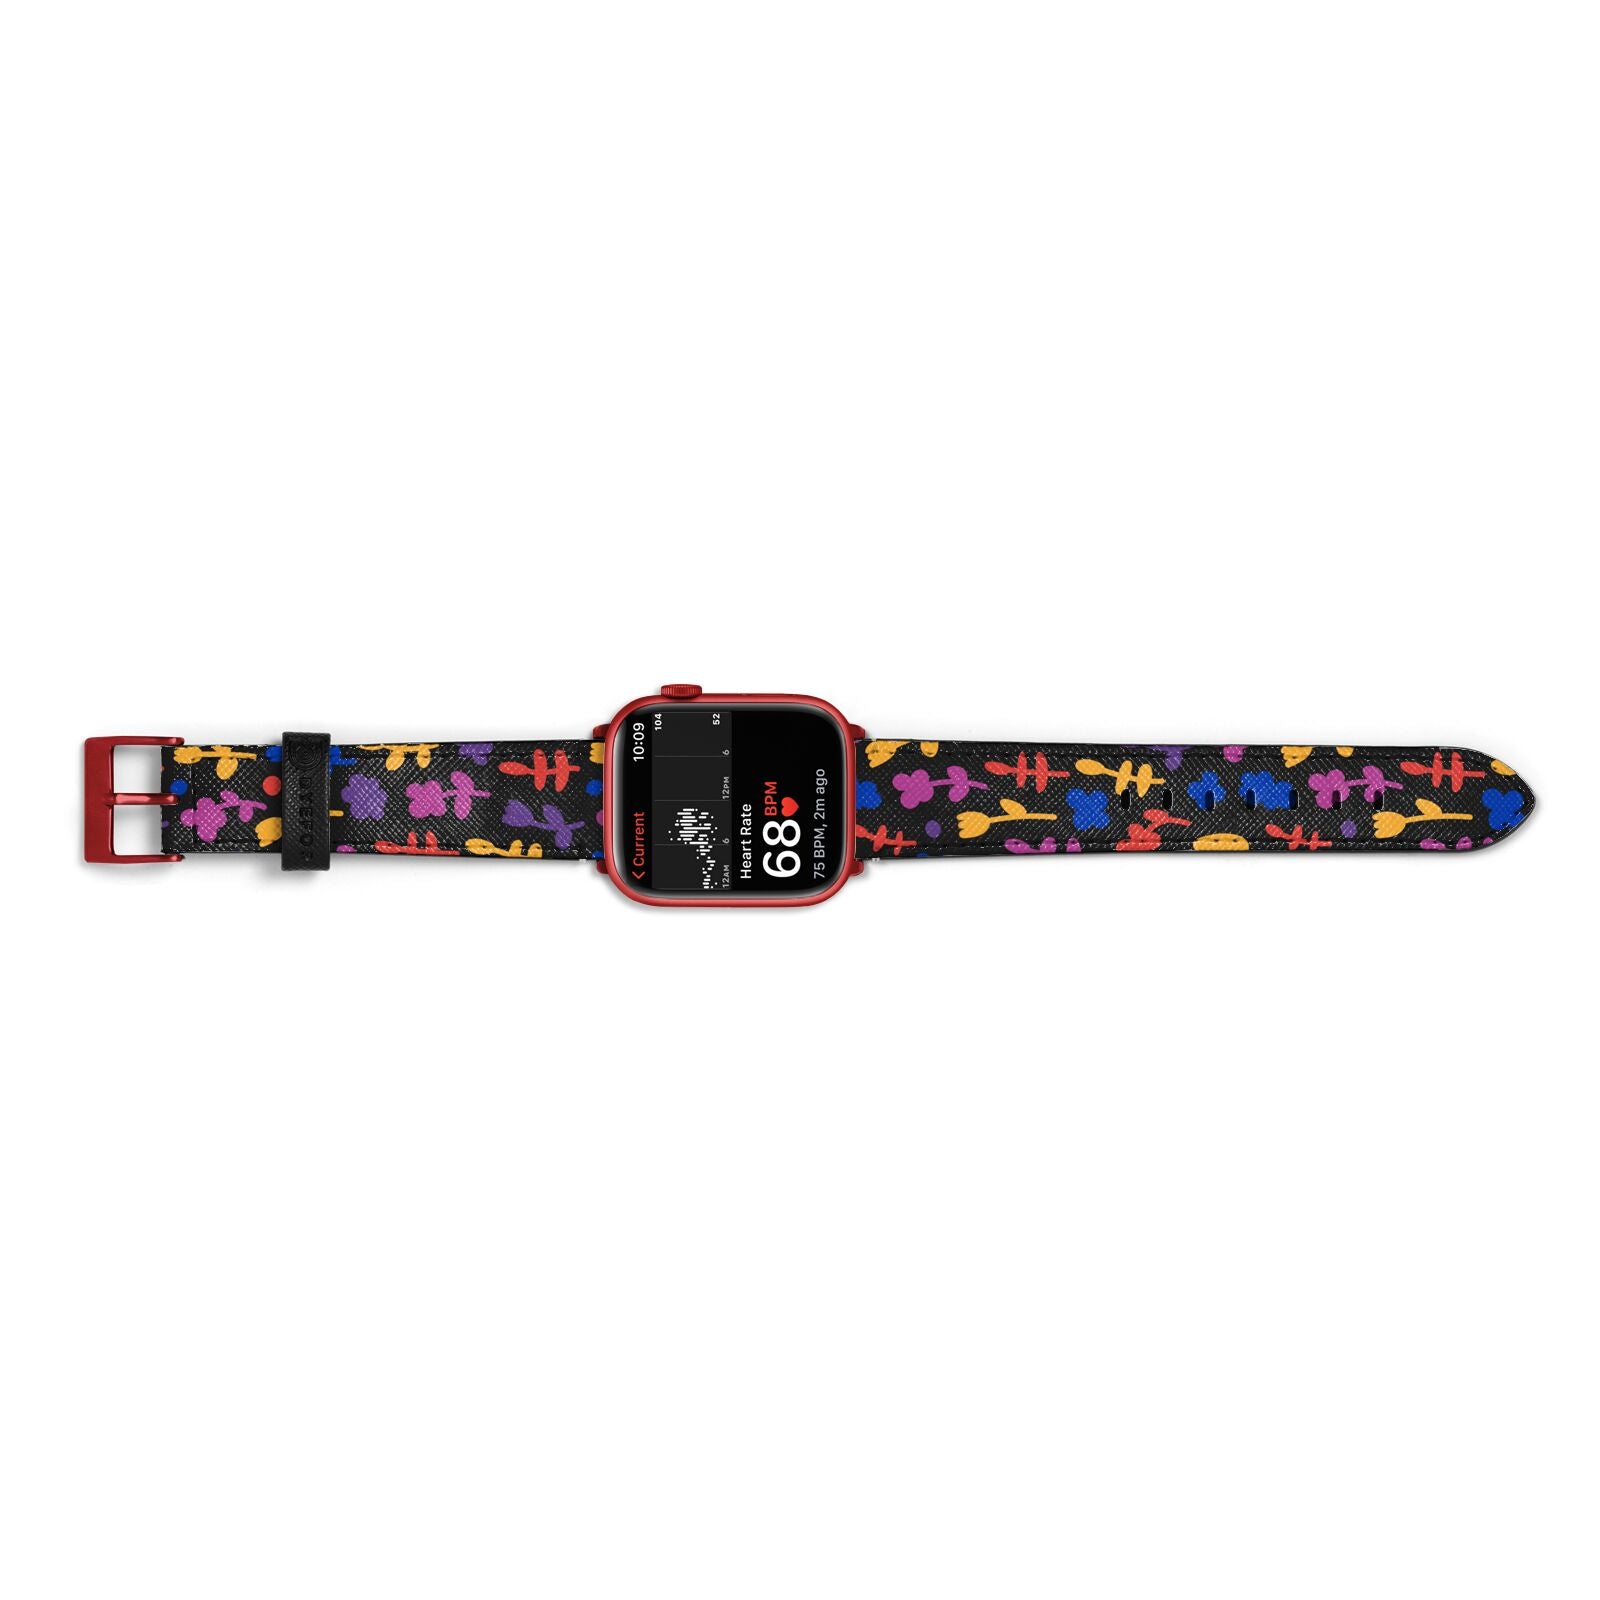 Abstract Floral Apple Watch Strap Size 38mm Landscape Image Red Hardware